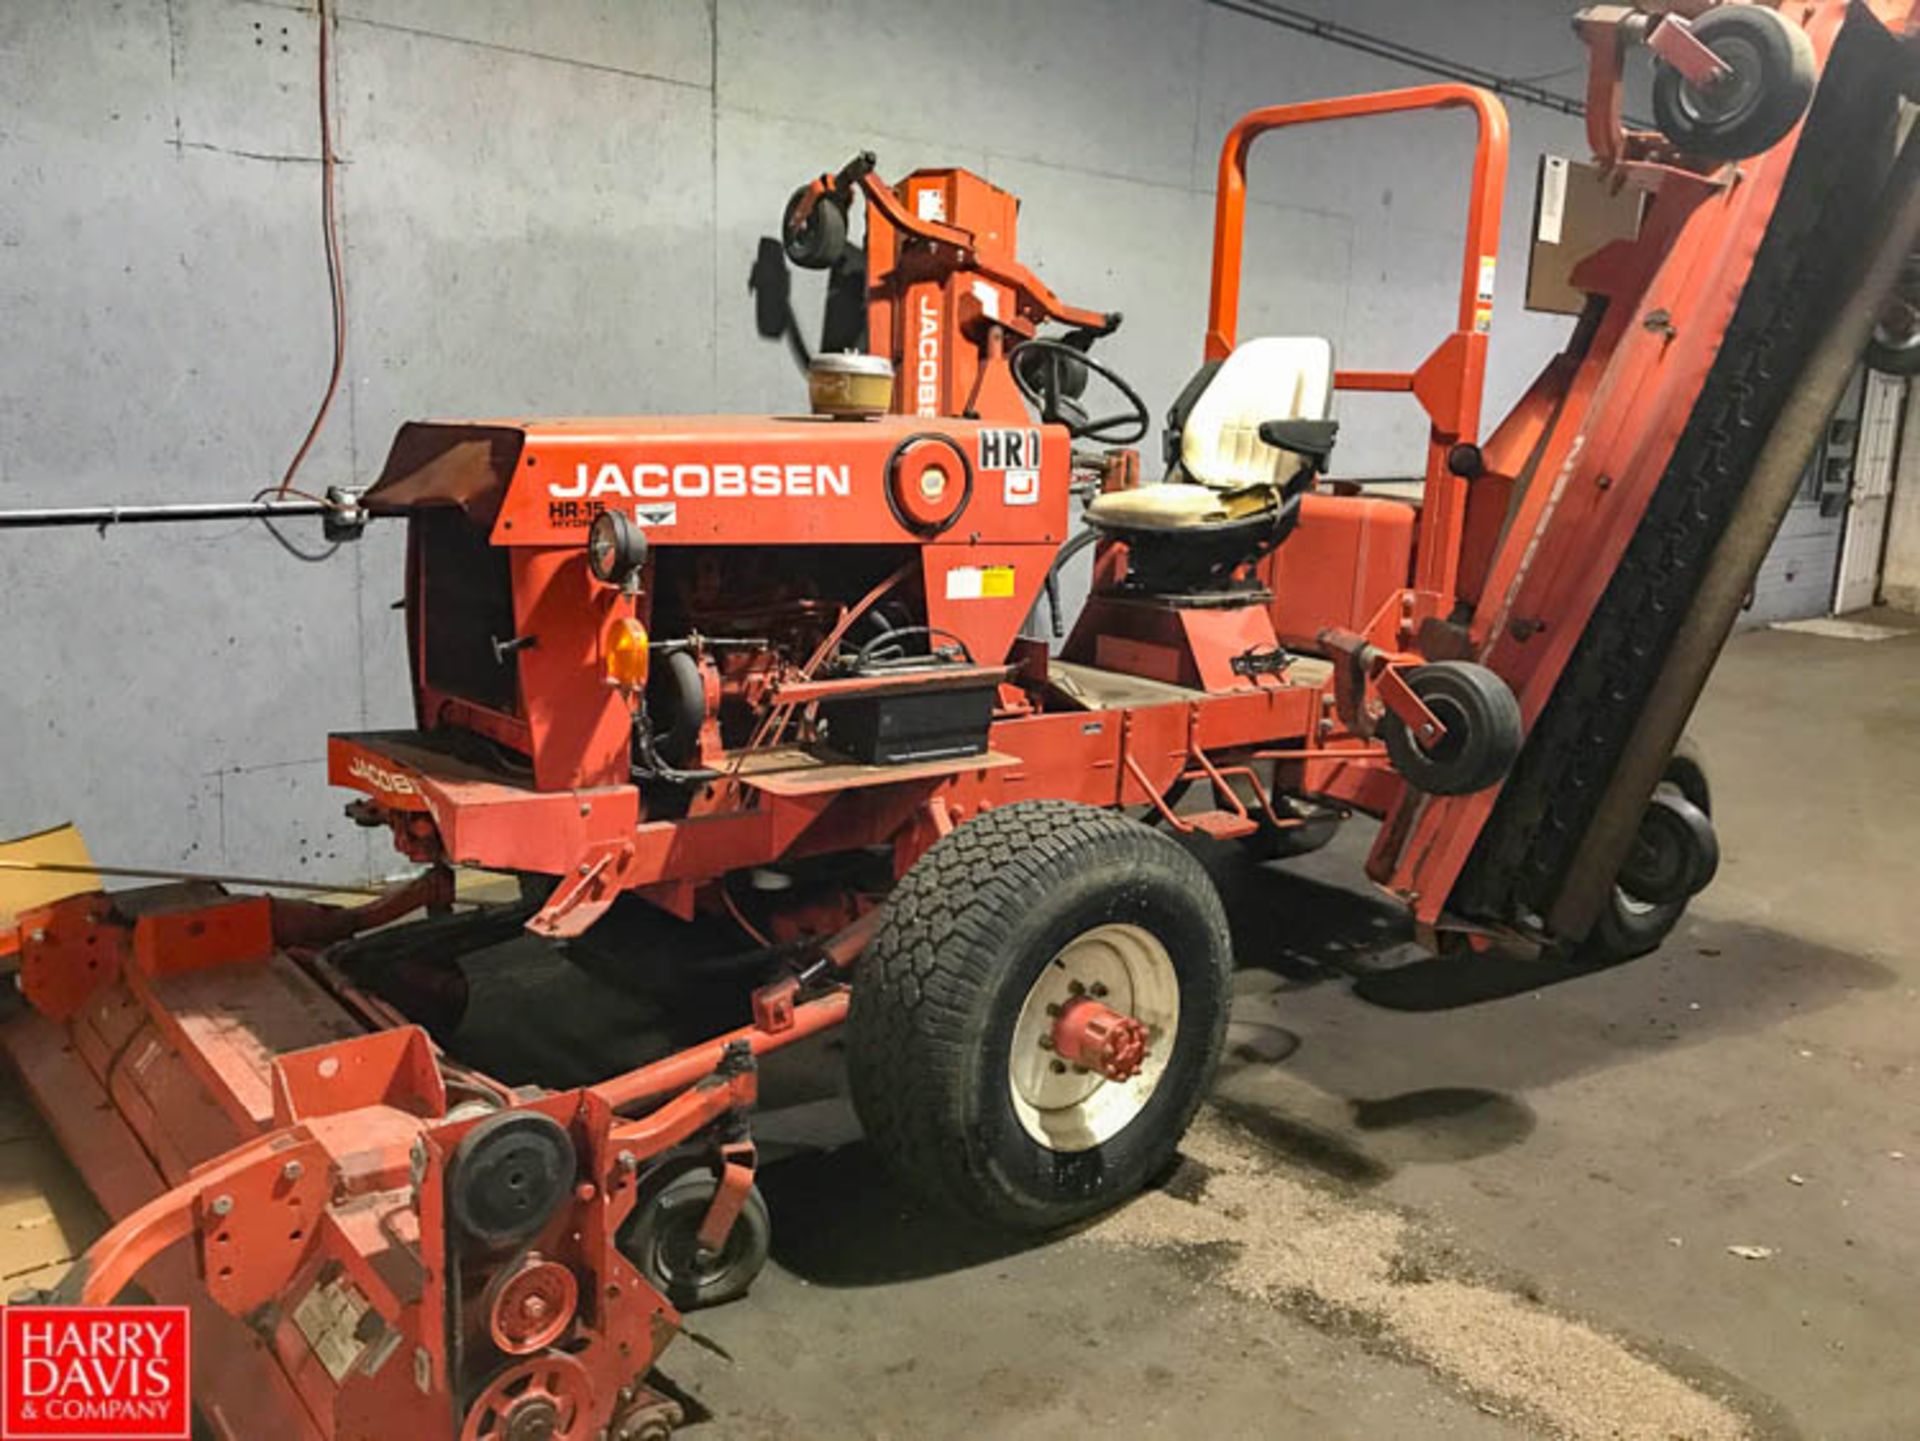 Jacobsen Tractor Mower, Model HR-15 Hydro with Diesel Engine Rigging Fee: $ 25